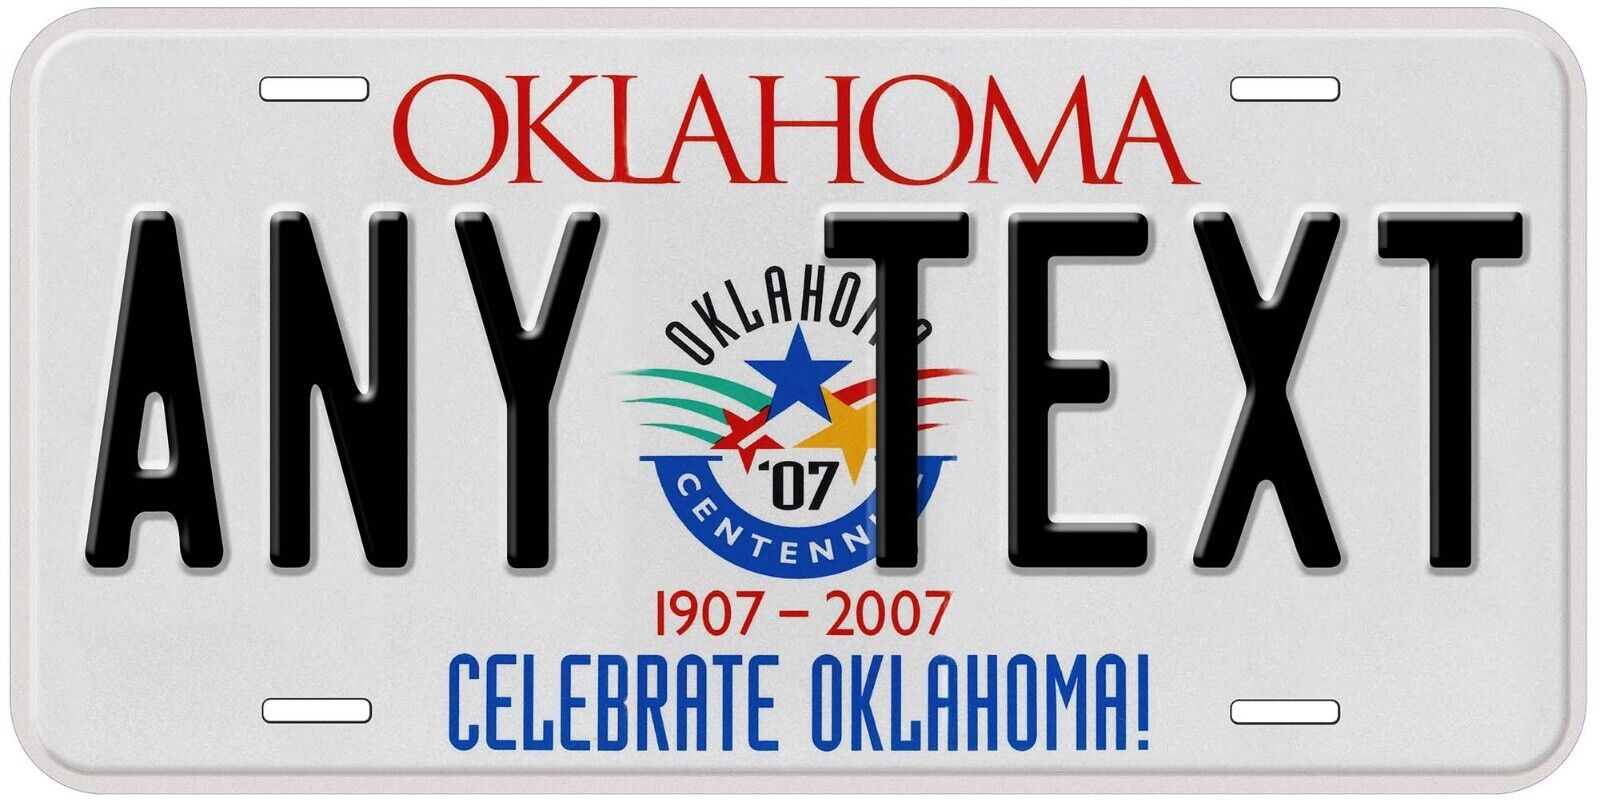 Personalized Oklahoma Centennial 2007 Novelty Car License Plate Any Text